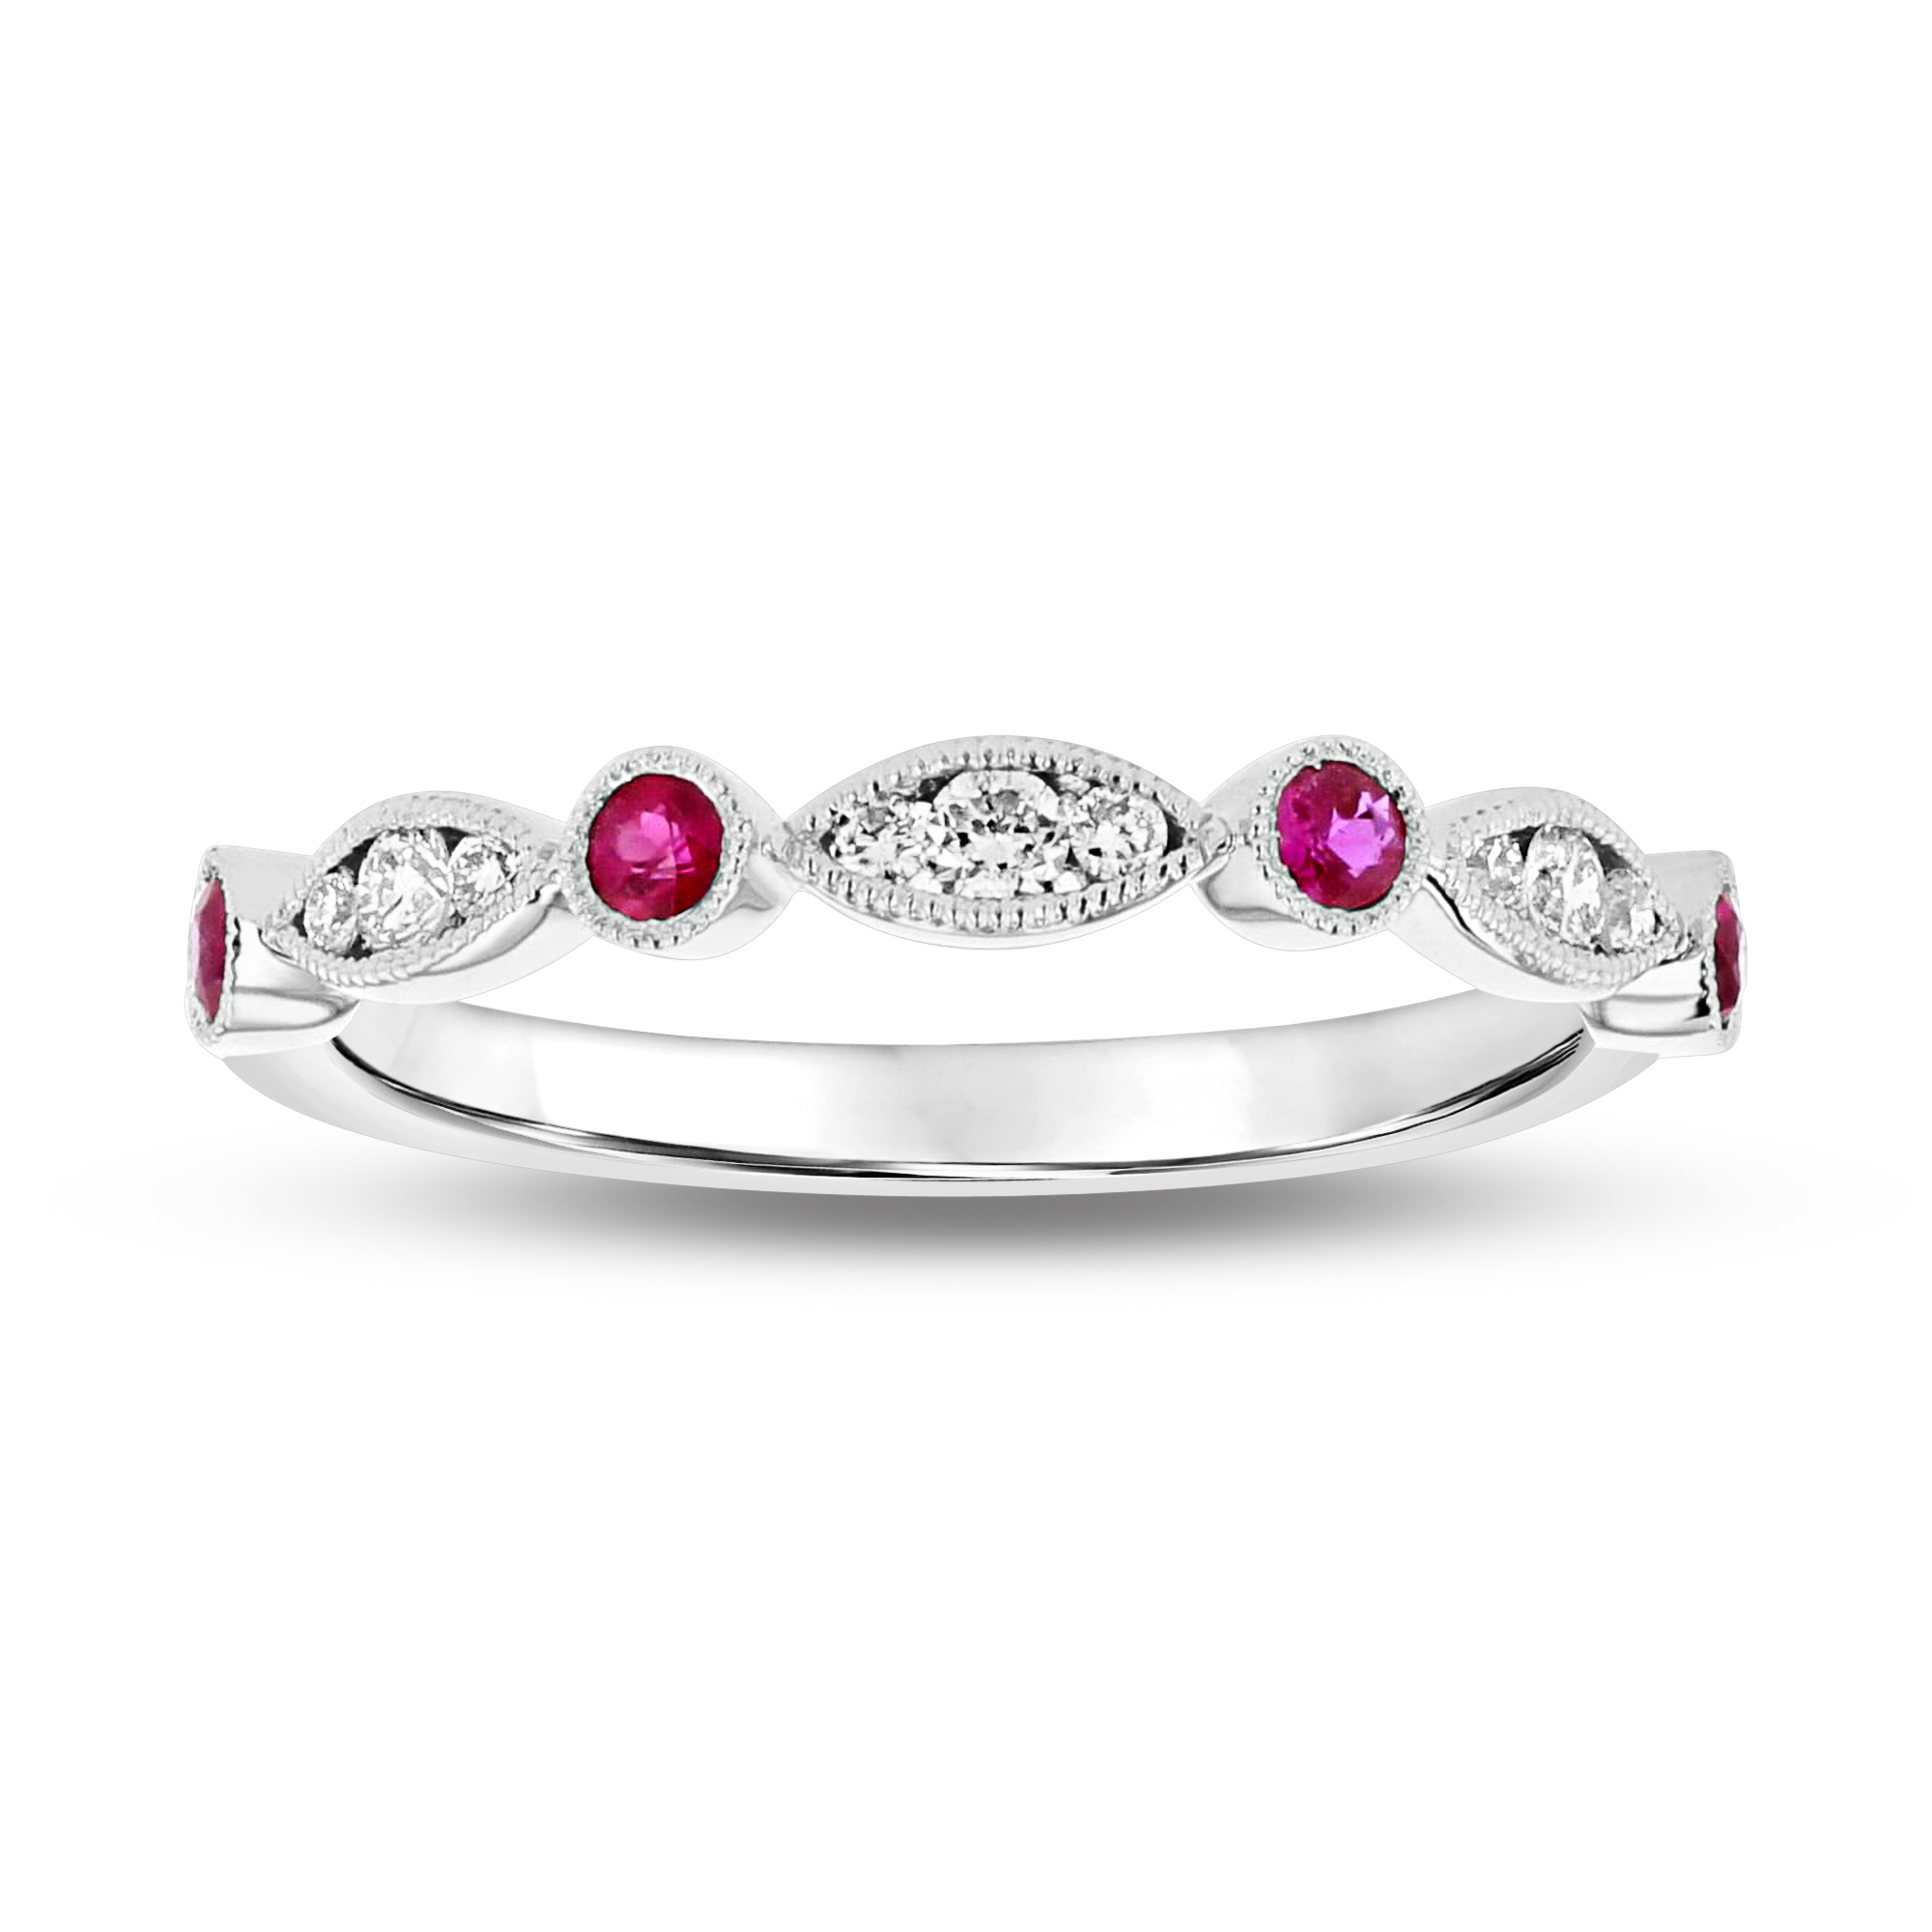 0.35ctw Diamond and Ruby Band in 18k White Gold